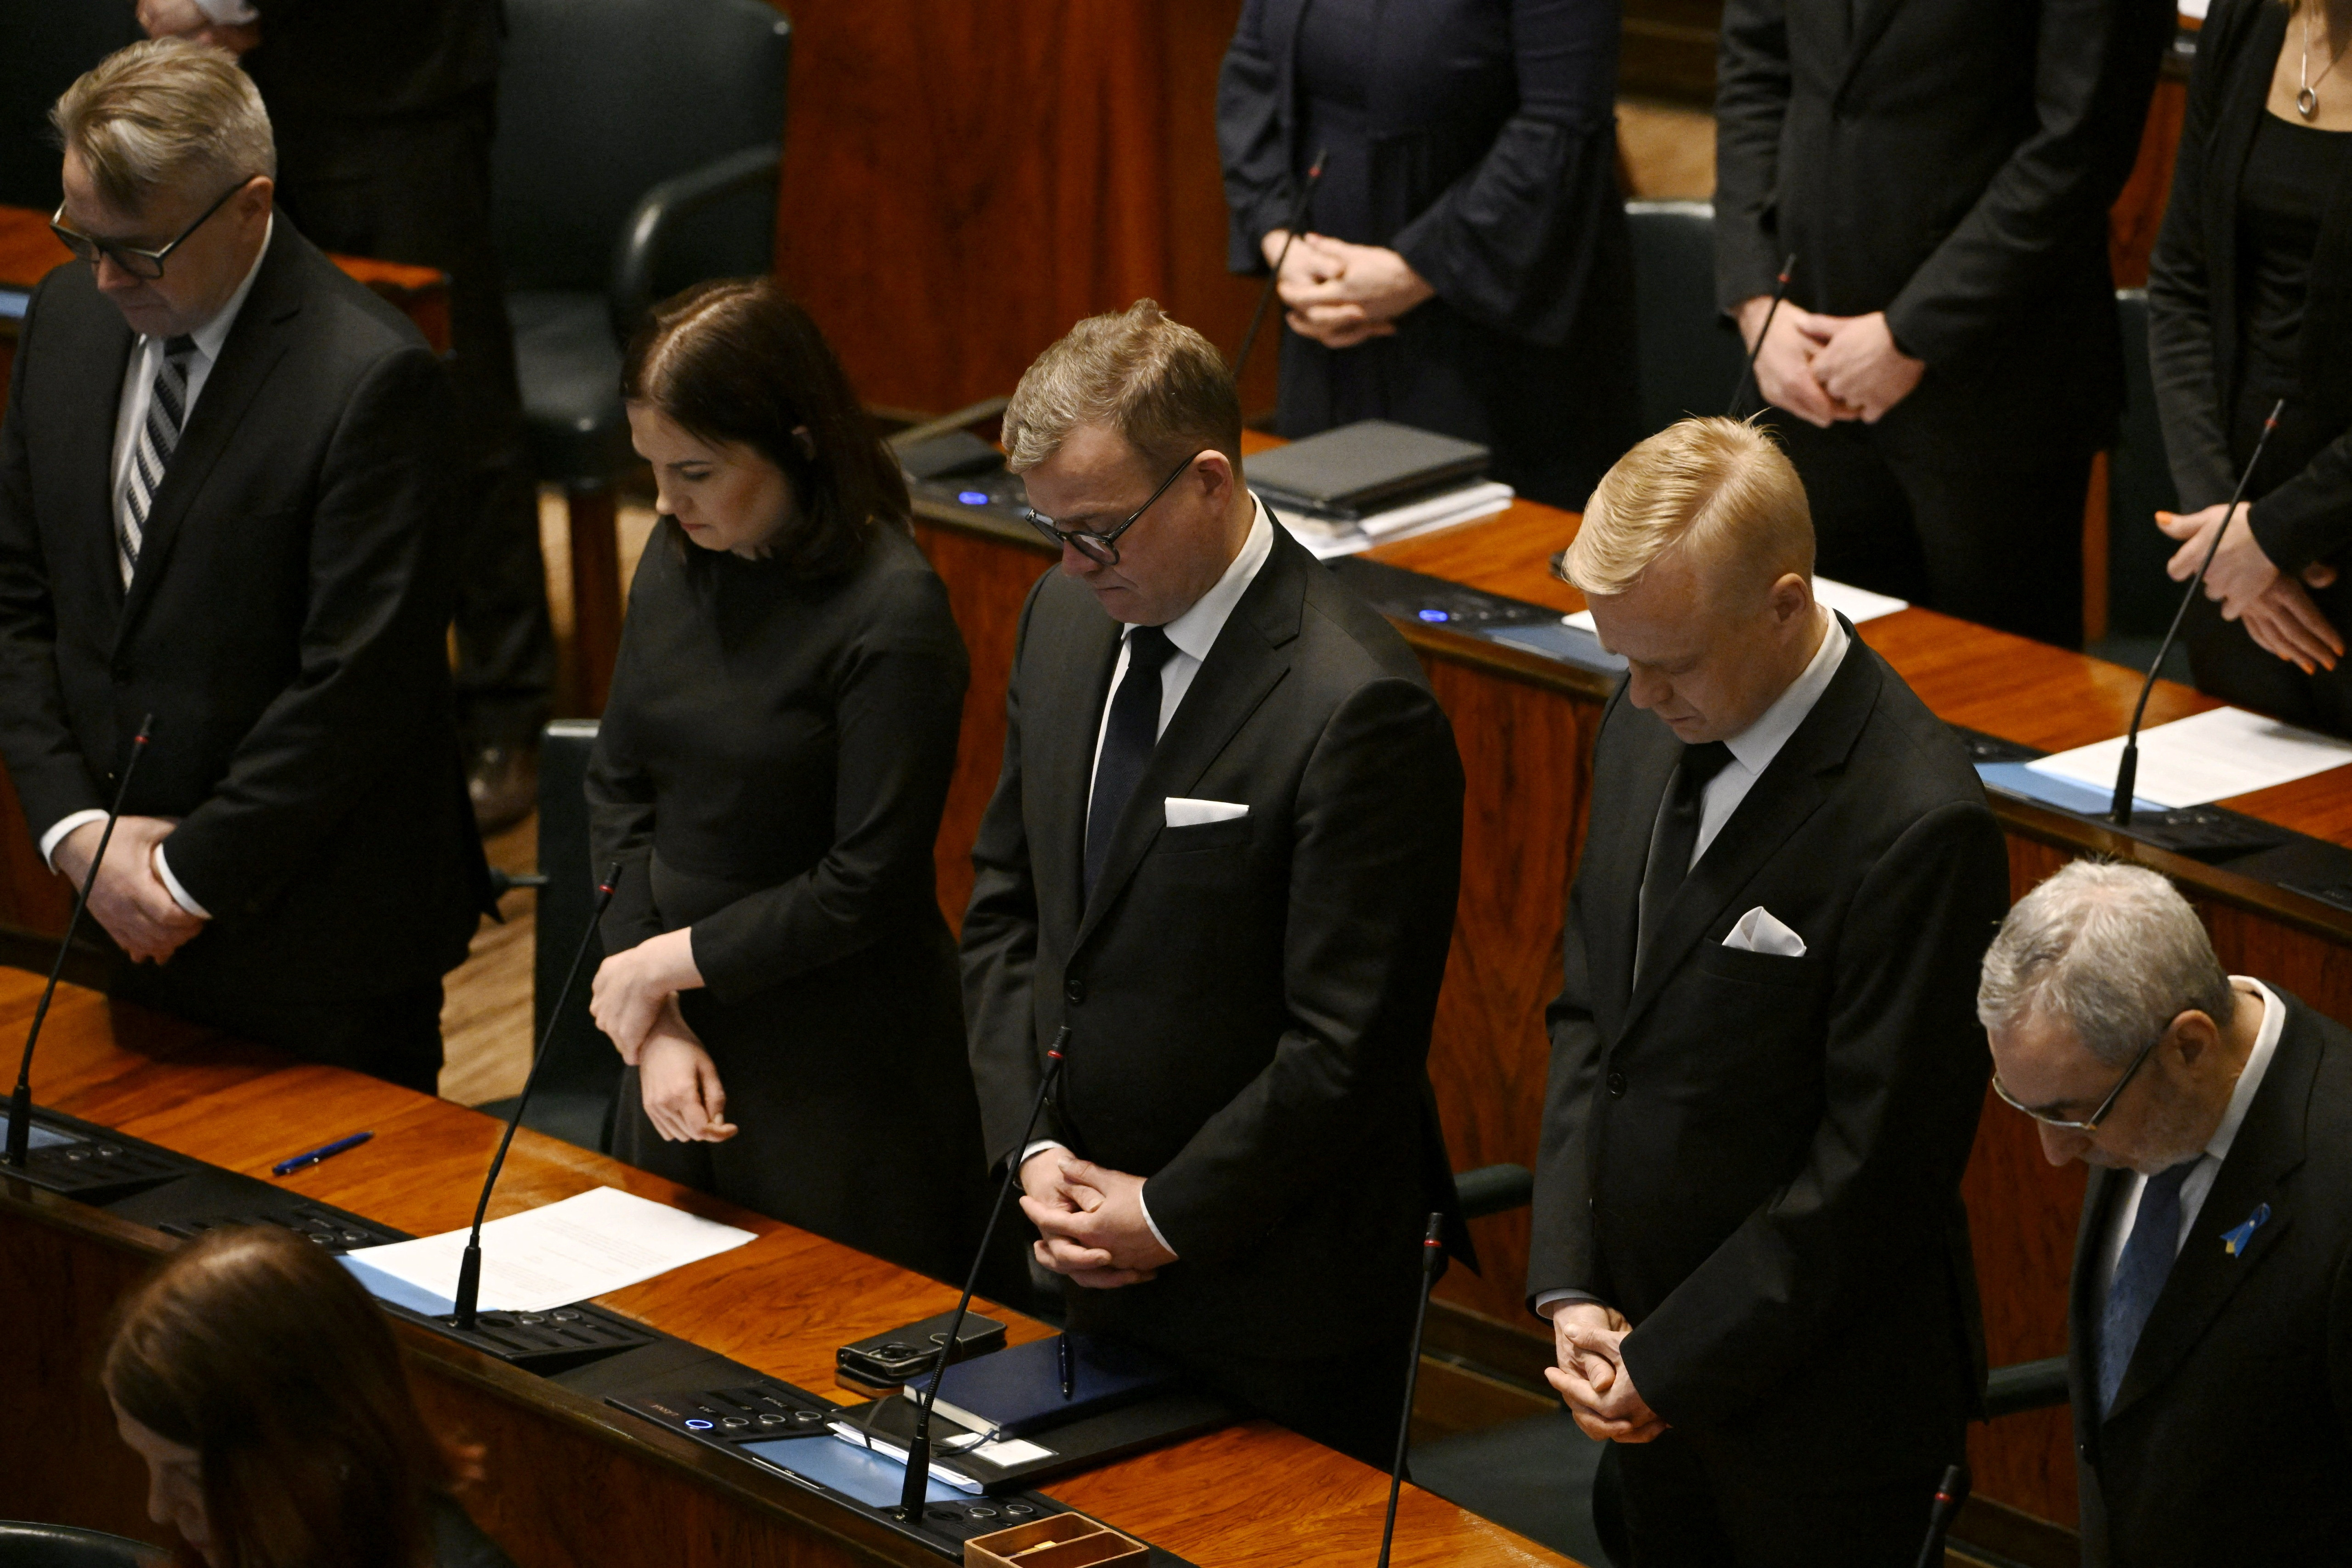 Members of the Finnish parliament pay their respect to the victims of the school shooting ahead of the parliament session, in Helsinki